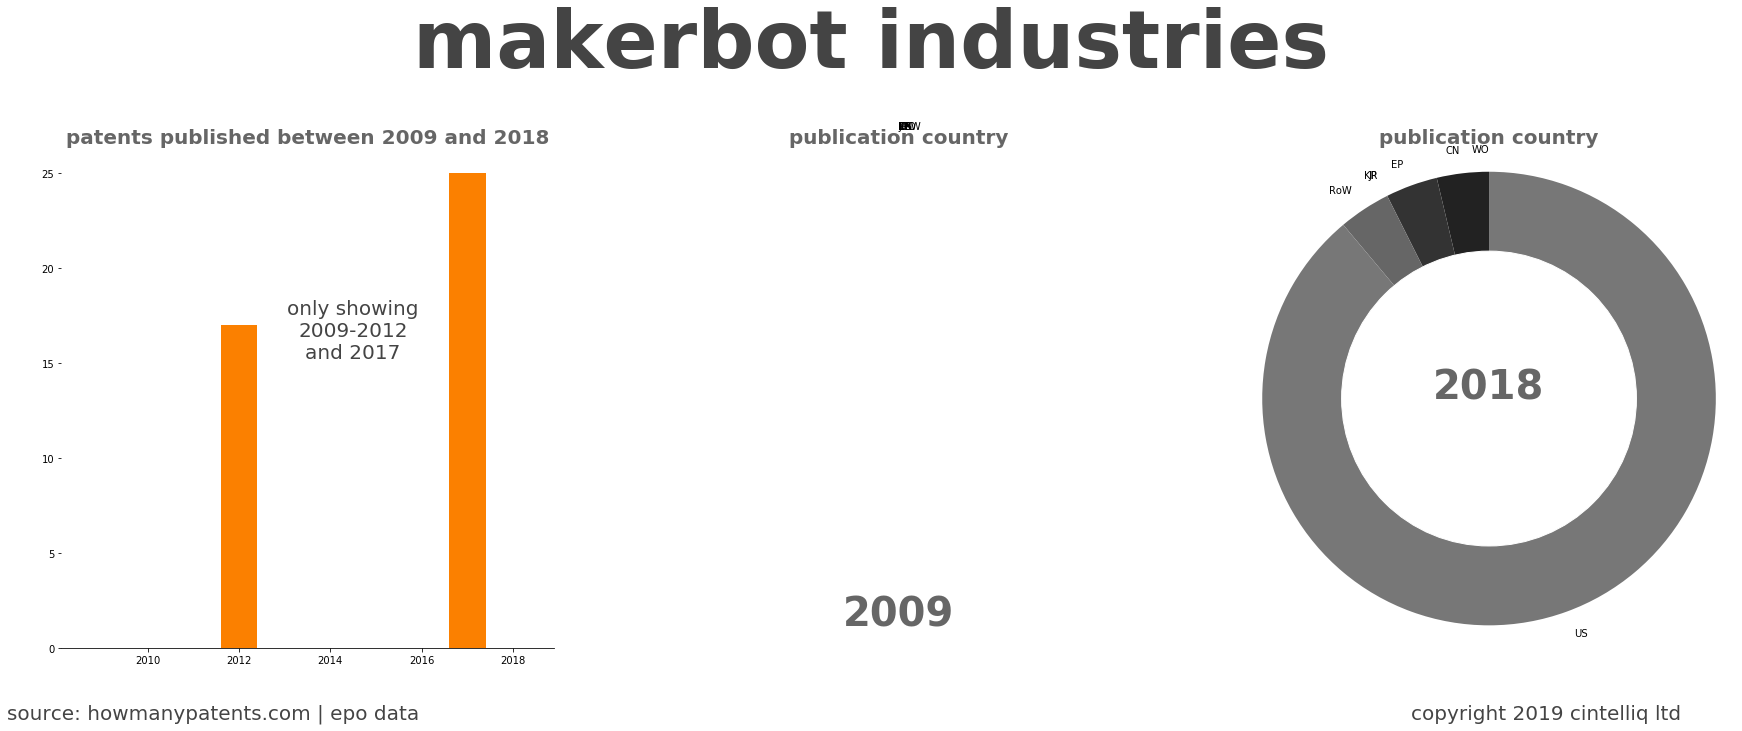 summary of patents for Makerbot Industries